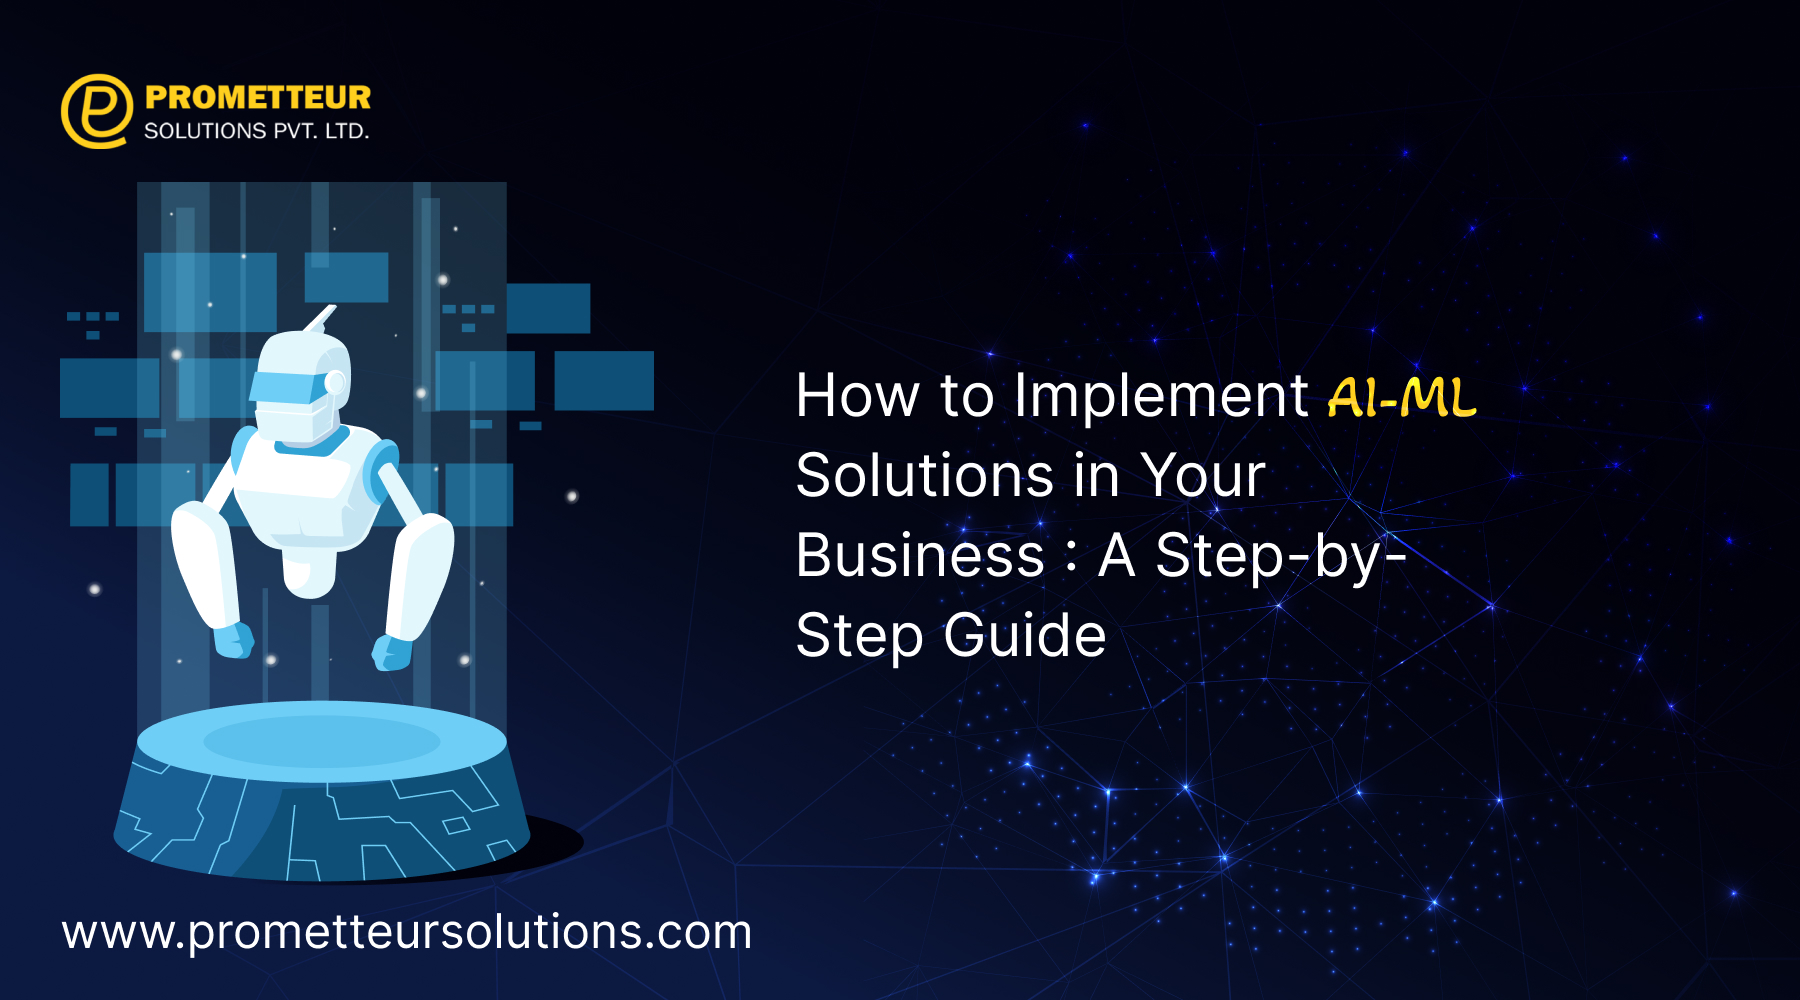 How-to-Implement-AI-ML-Solutions-in-Your-Business_-A-Step-by-Step-Guide